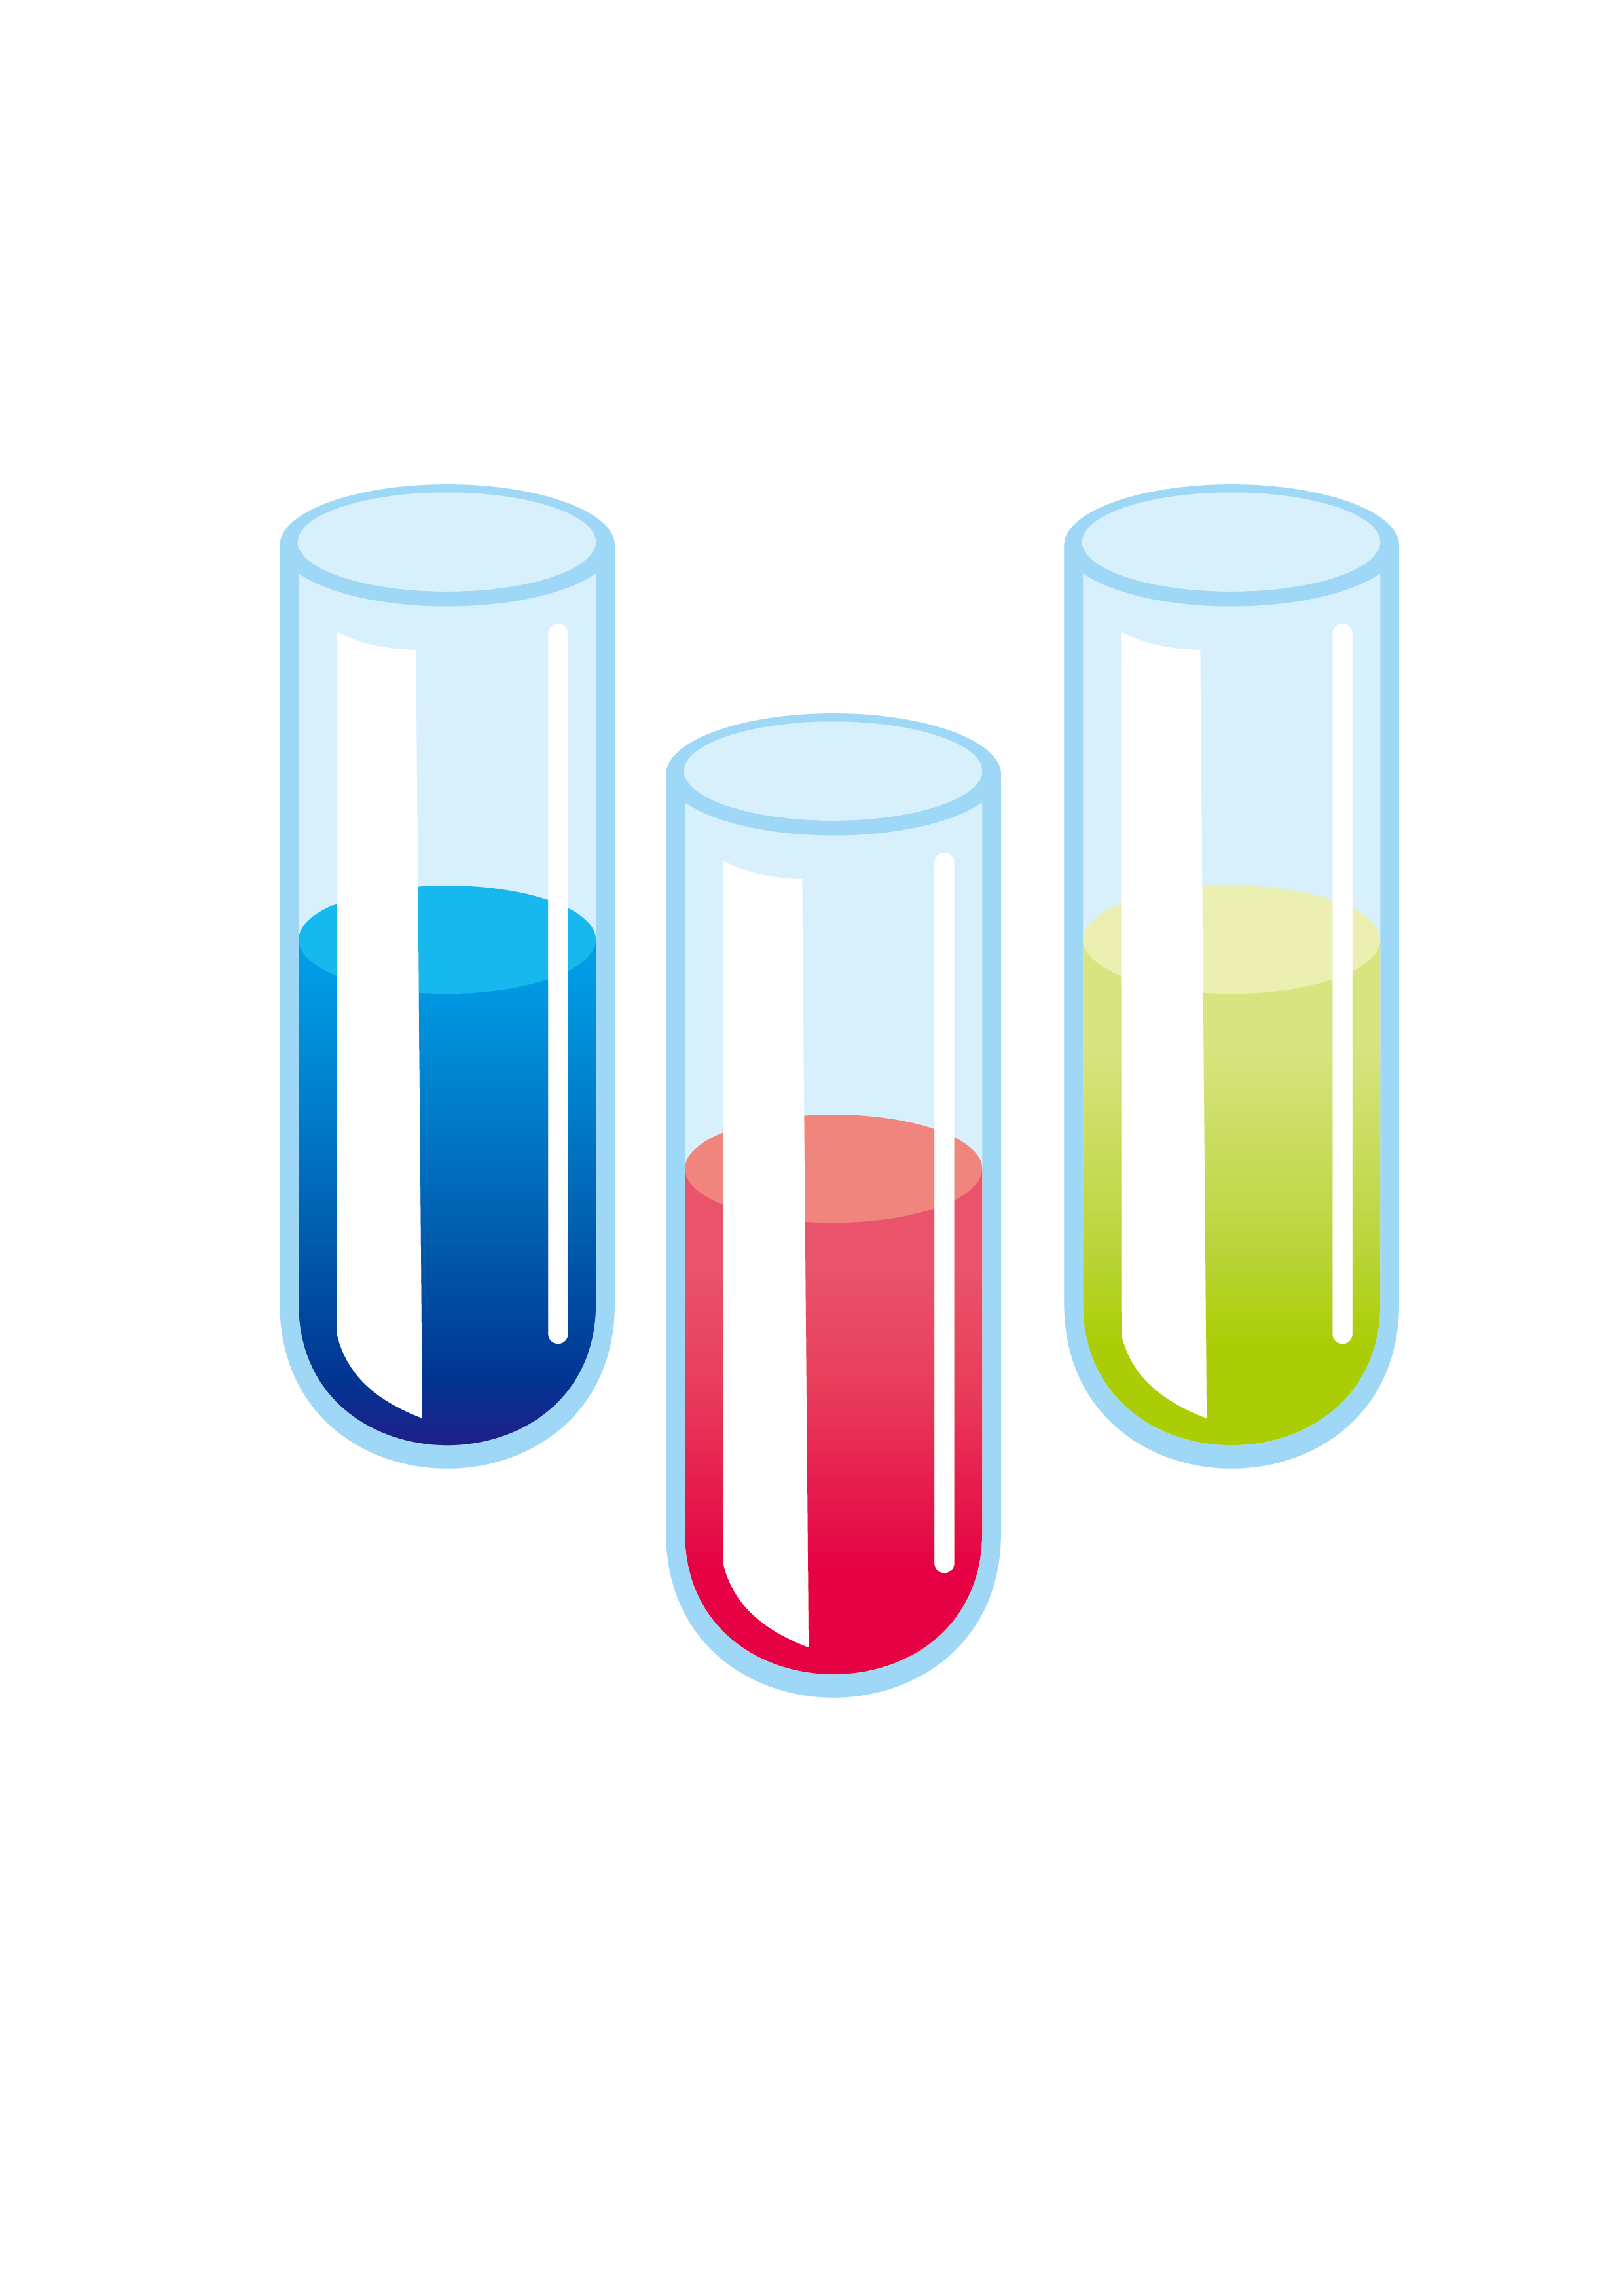 experiment clipart chemical property